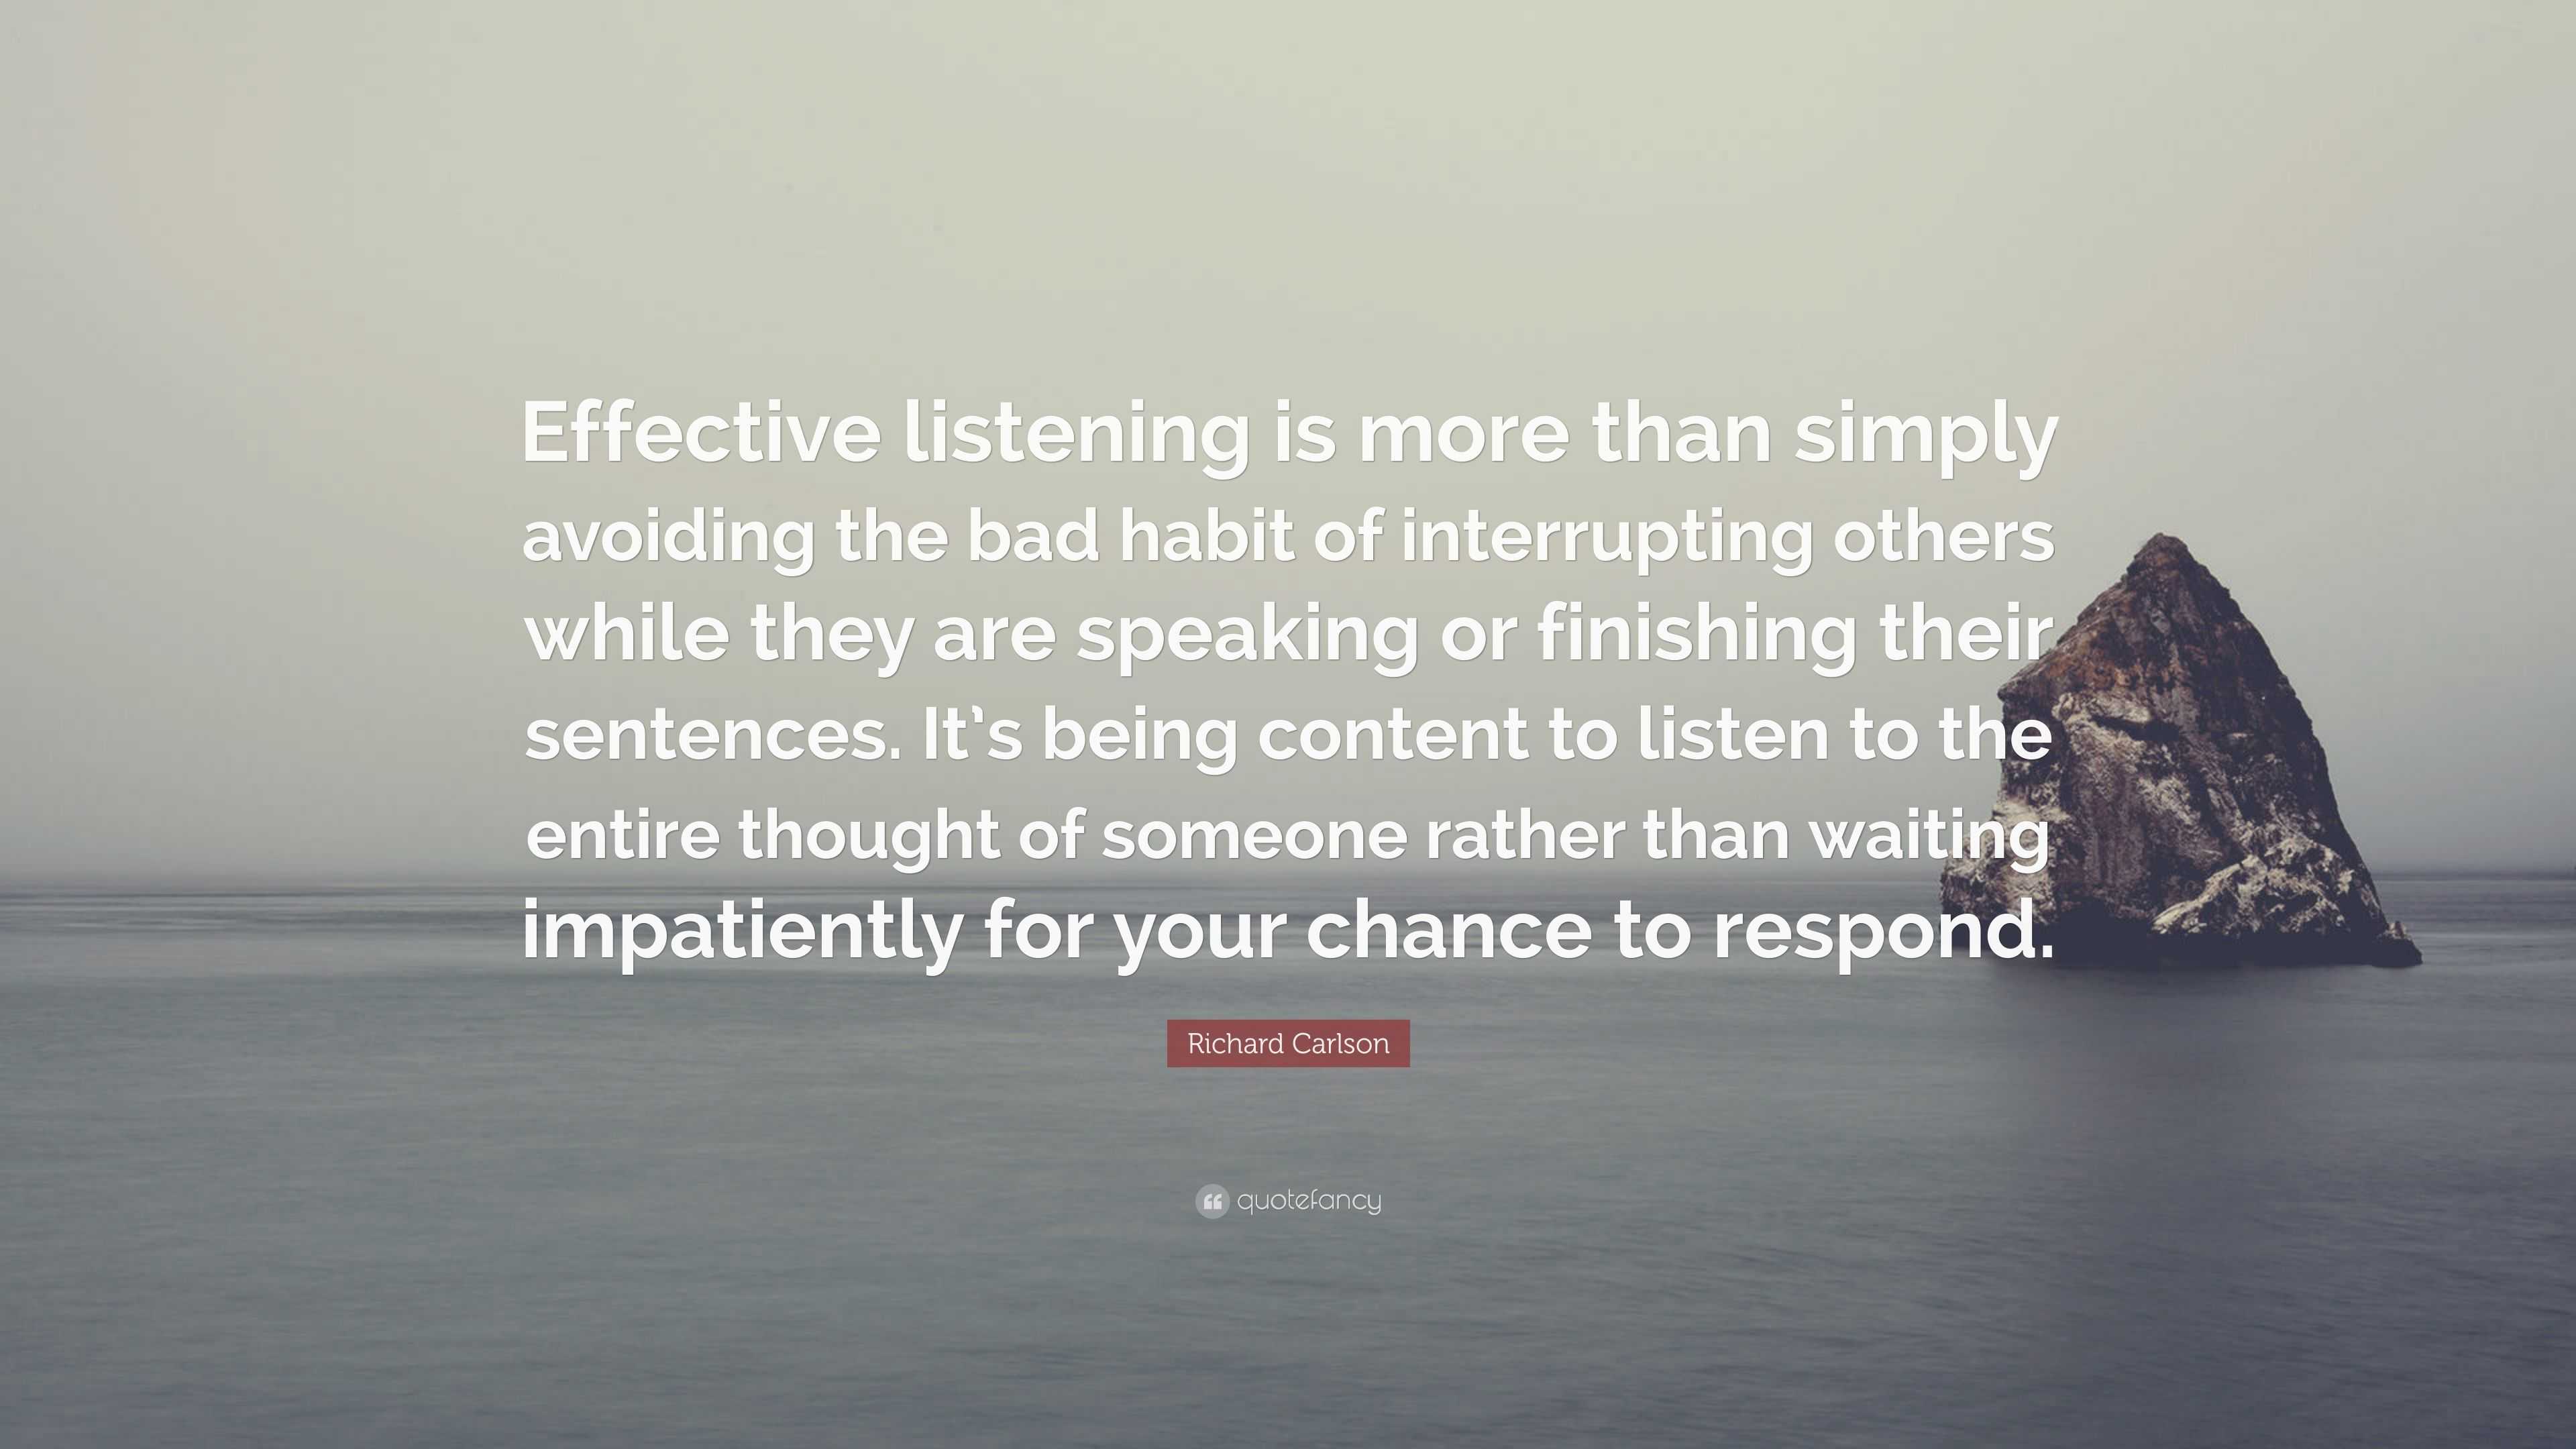 argumentative essay on effective listening is more important than talking